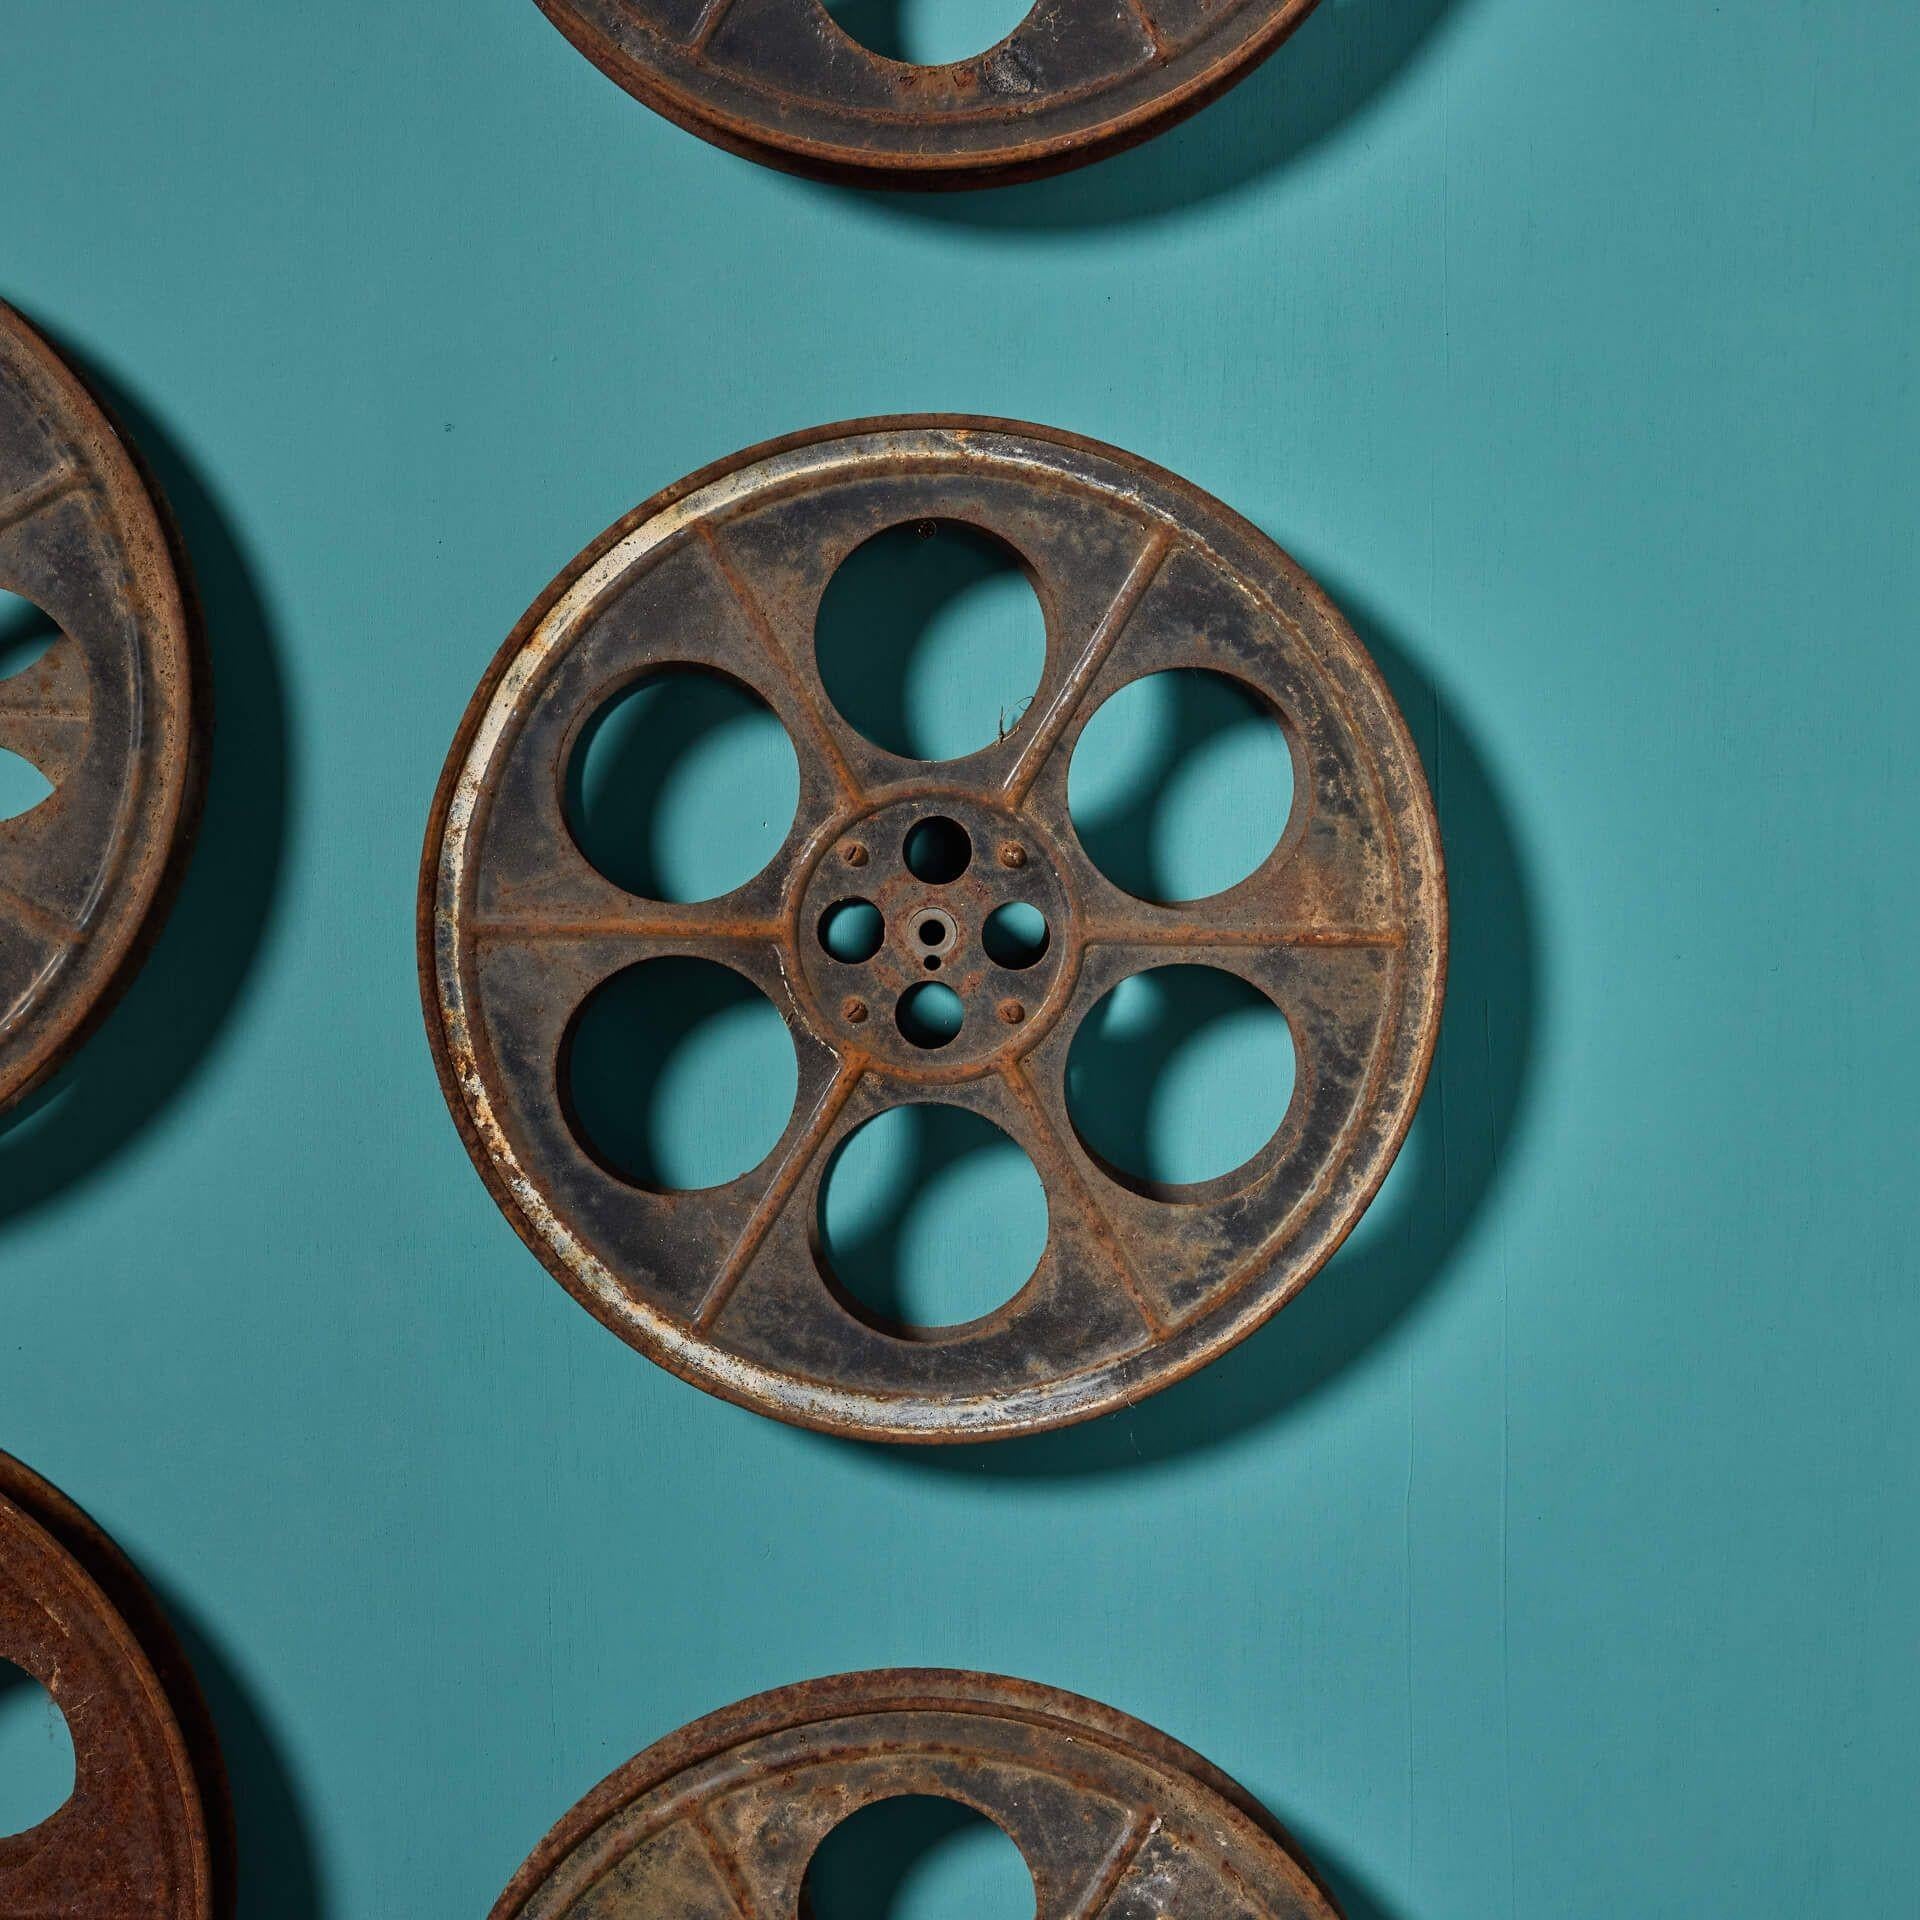 A collection of nine cinema projection spools made from pressed steel. One marked ‘Kershaw England’. Dating from the 1950s, they have an even surface rust finish throughout, making for stylish vintage decor in an industrial or rustic